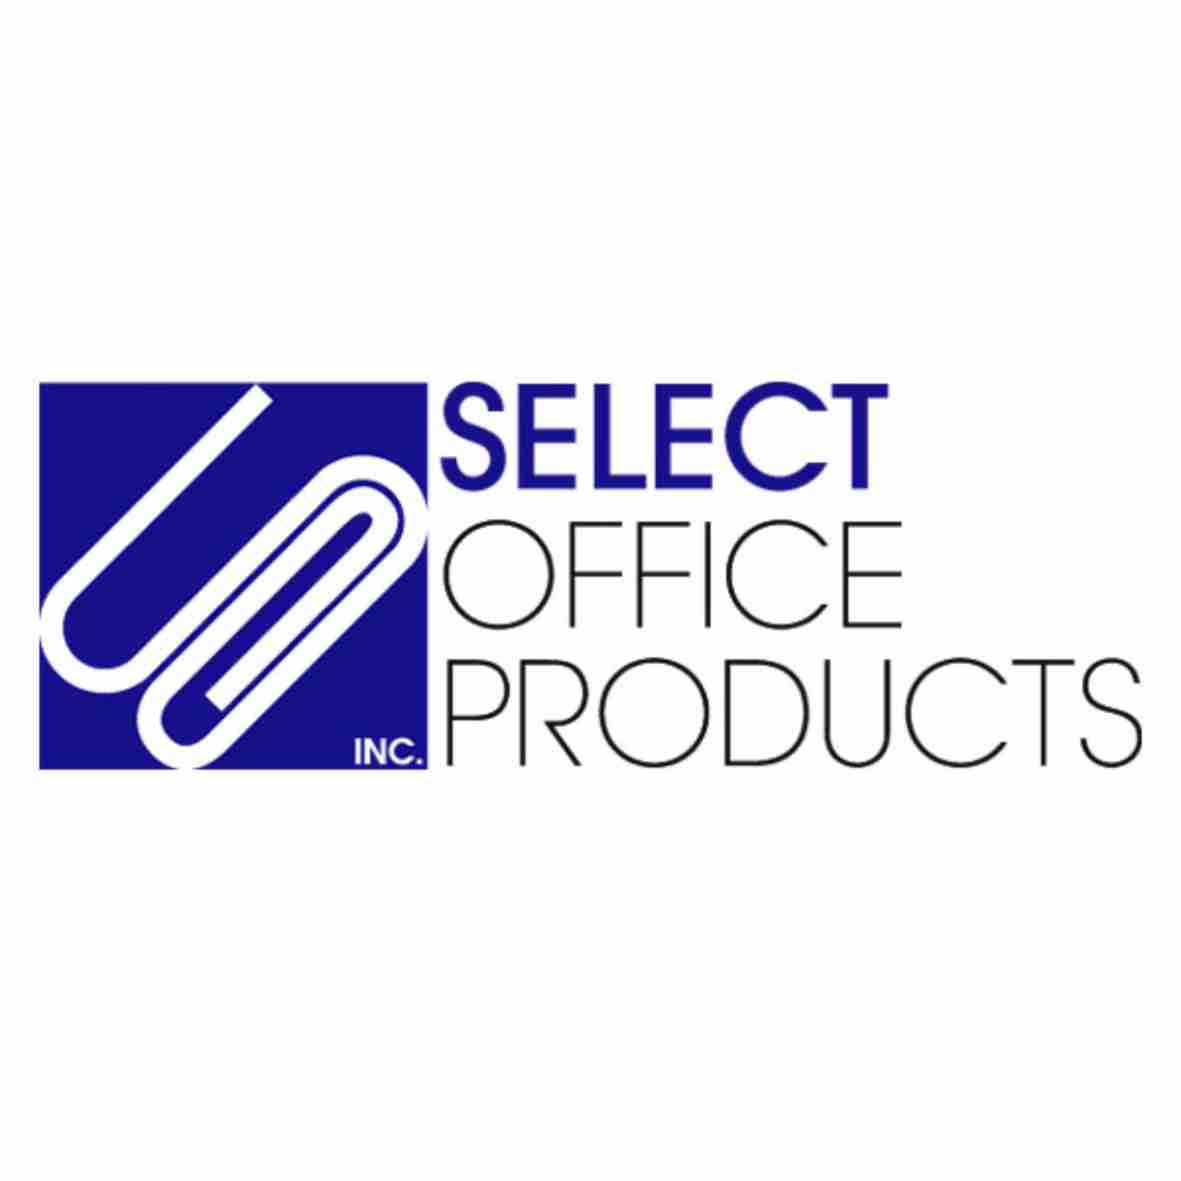 OFFICE PRODUCTS